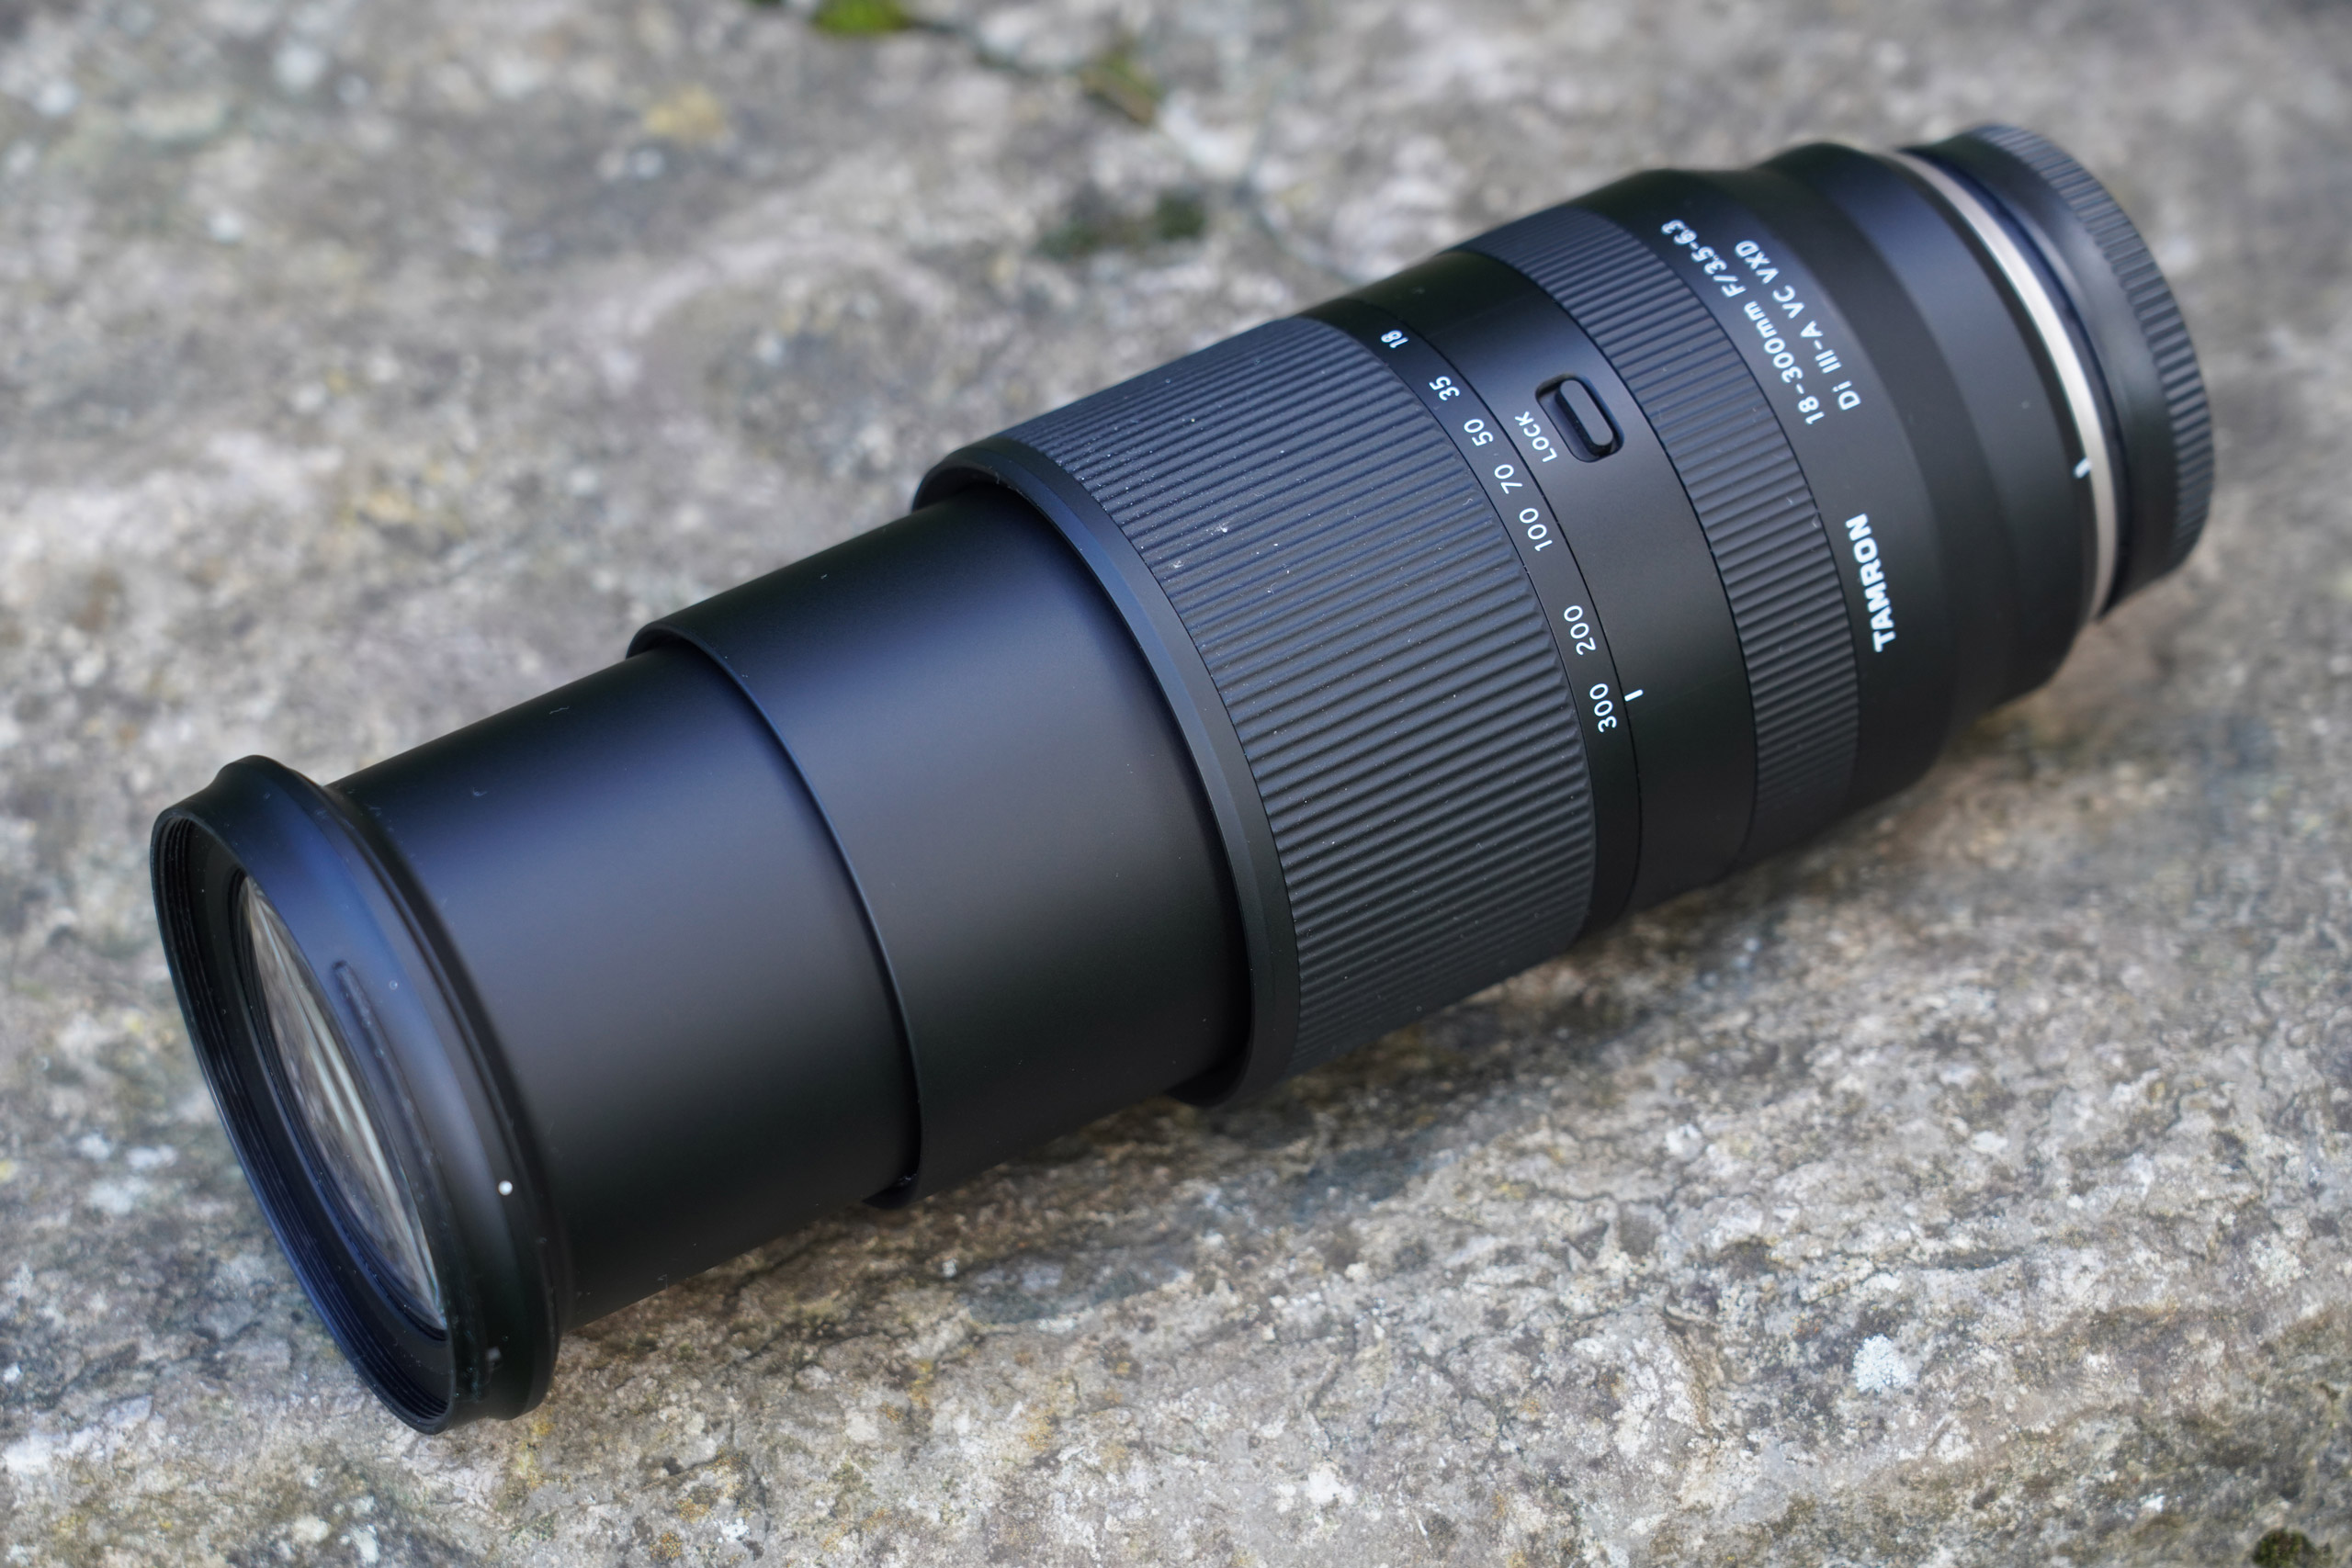 Tamron 18-300mm F/3.5-6.3 Di III-A VC - full zoom lens extended